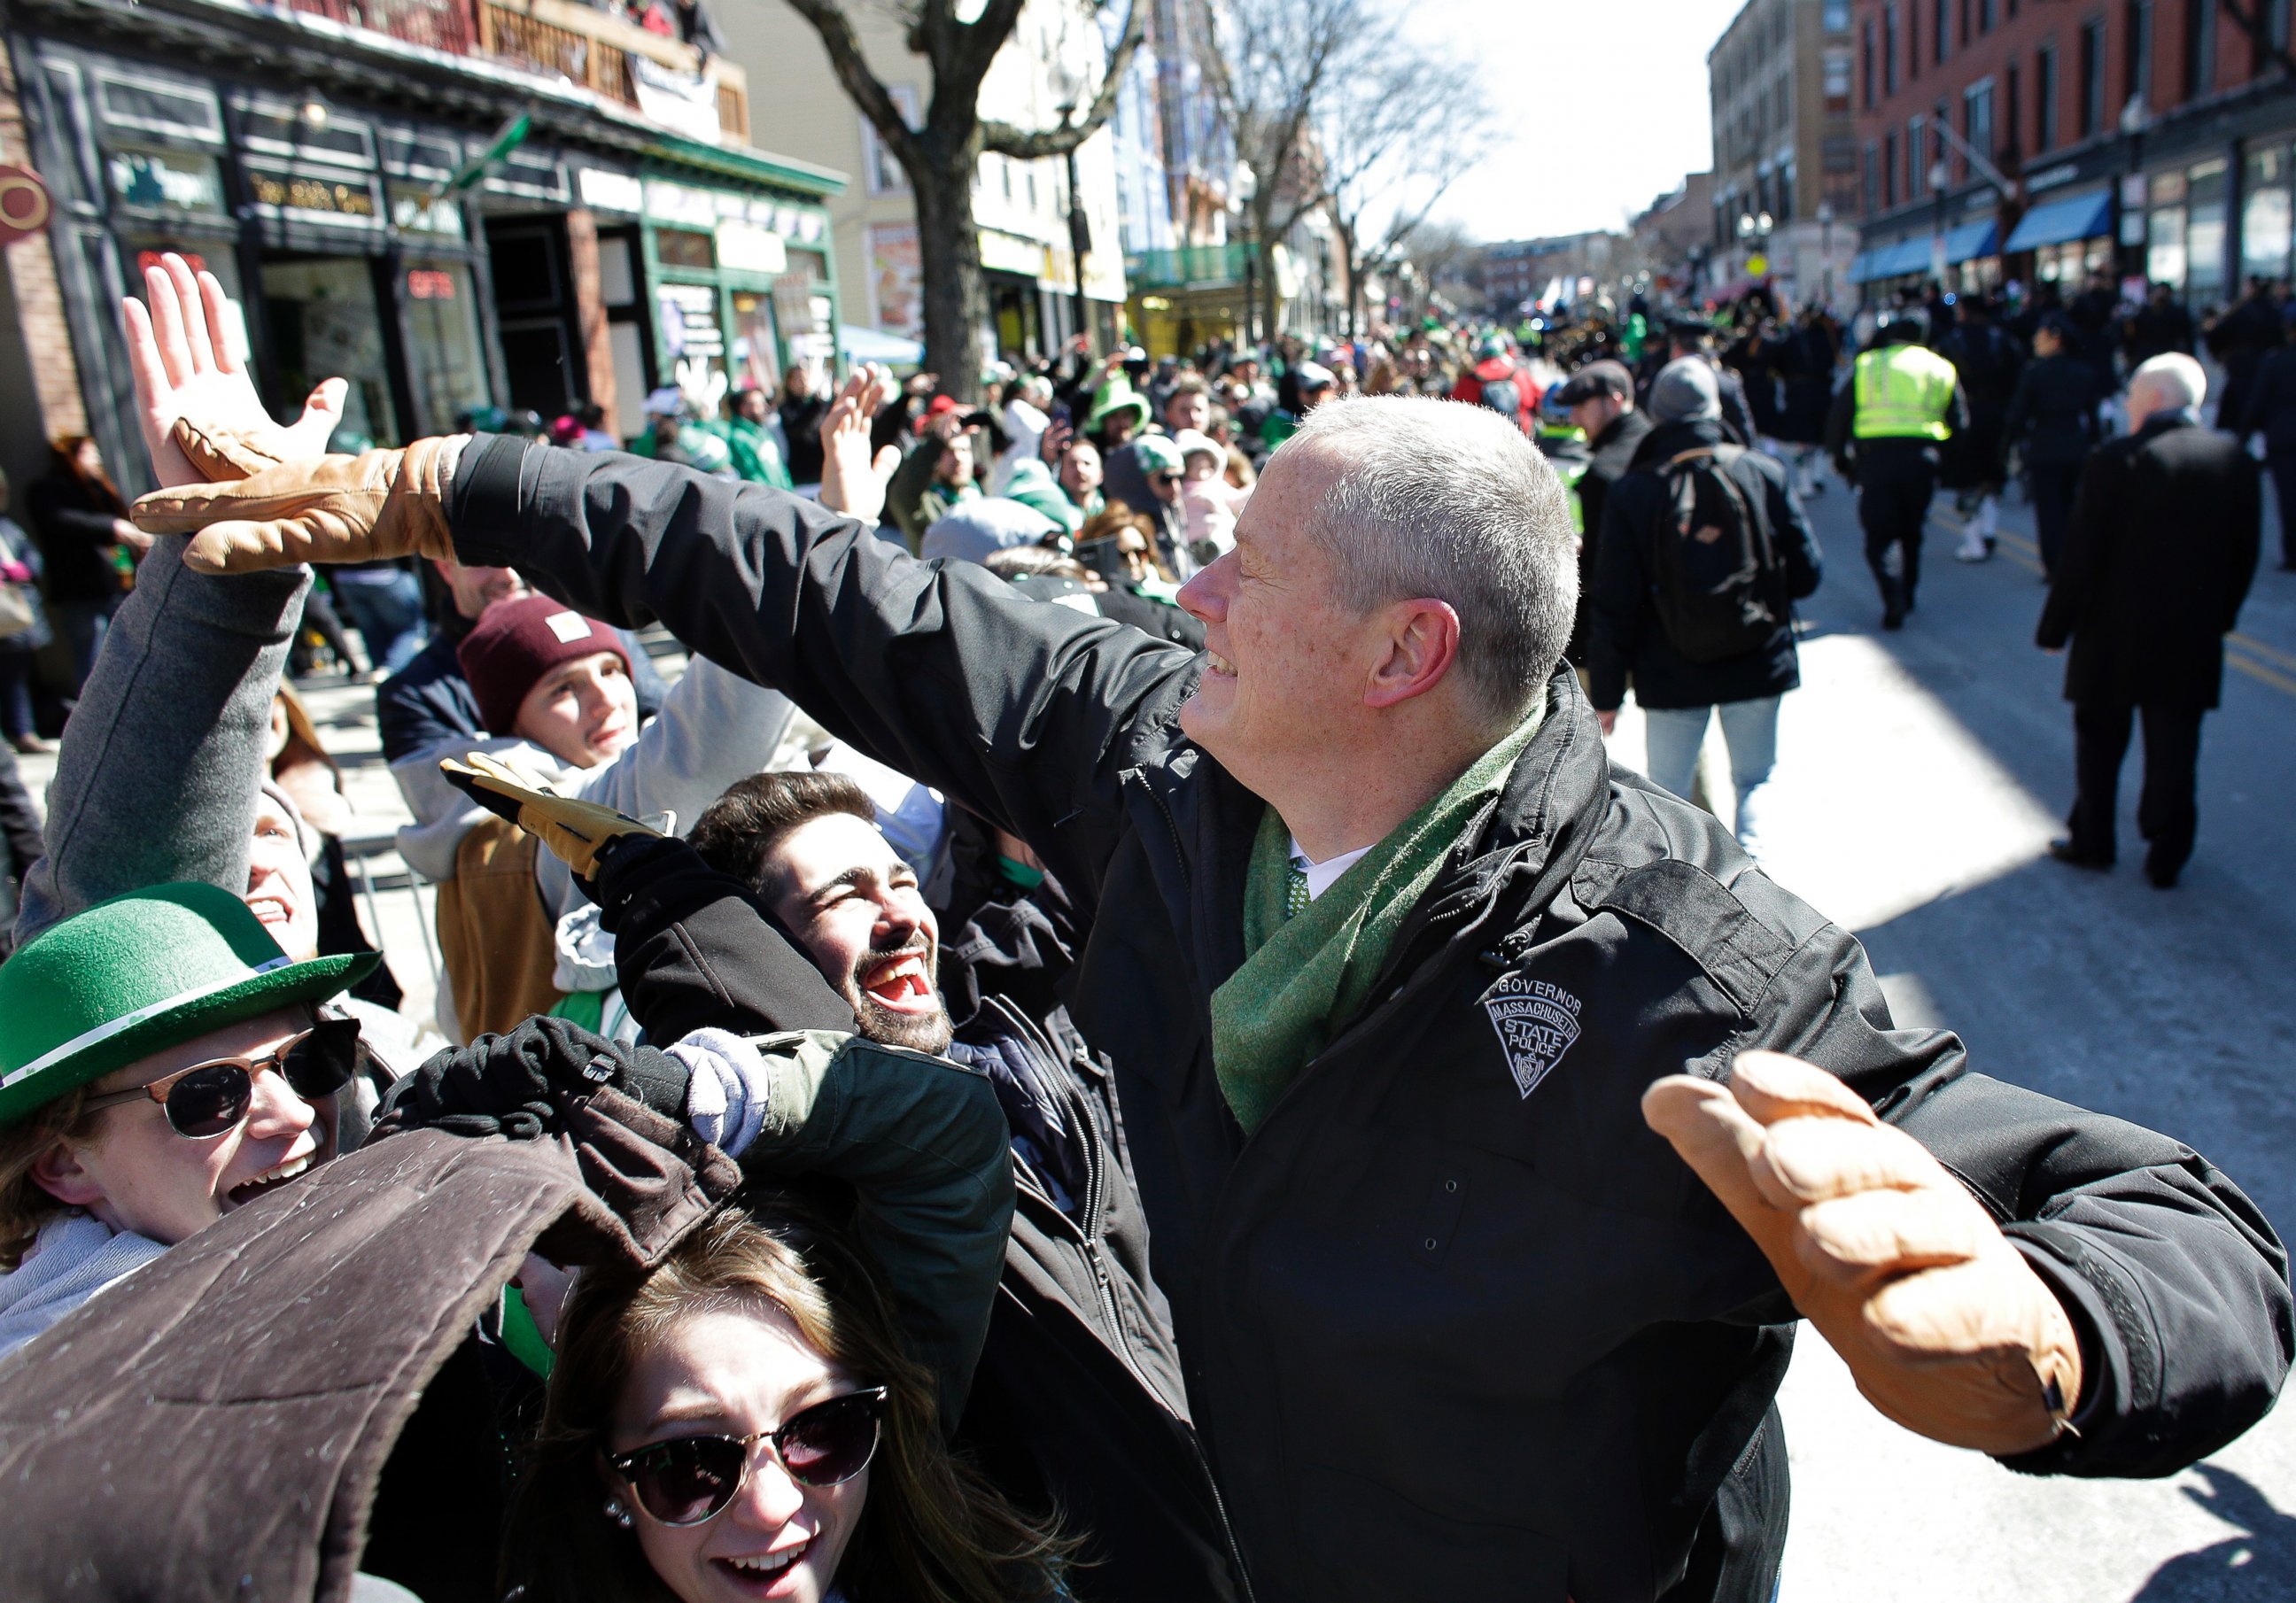 Massachusetts Gov. Charlie Baker, right, greets people in the crowd during the annual St. Patrick's Day parade, Sunday, March 18, 2018, in Boston.